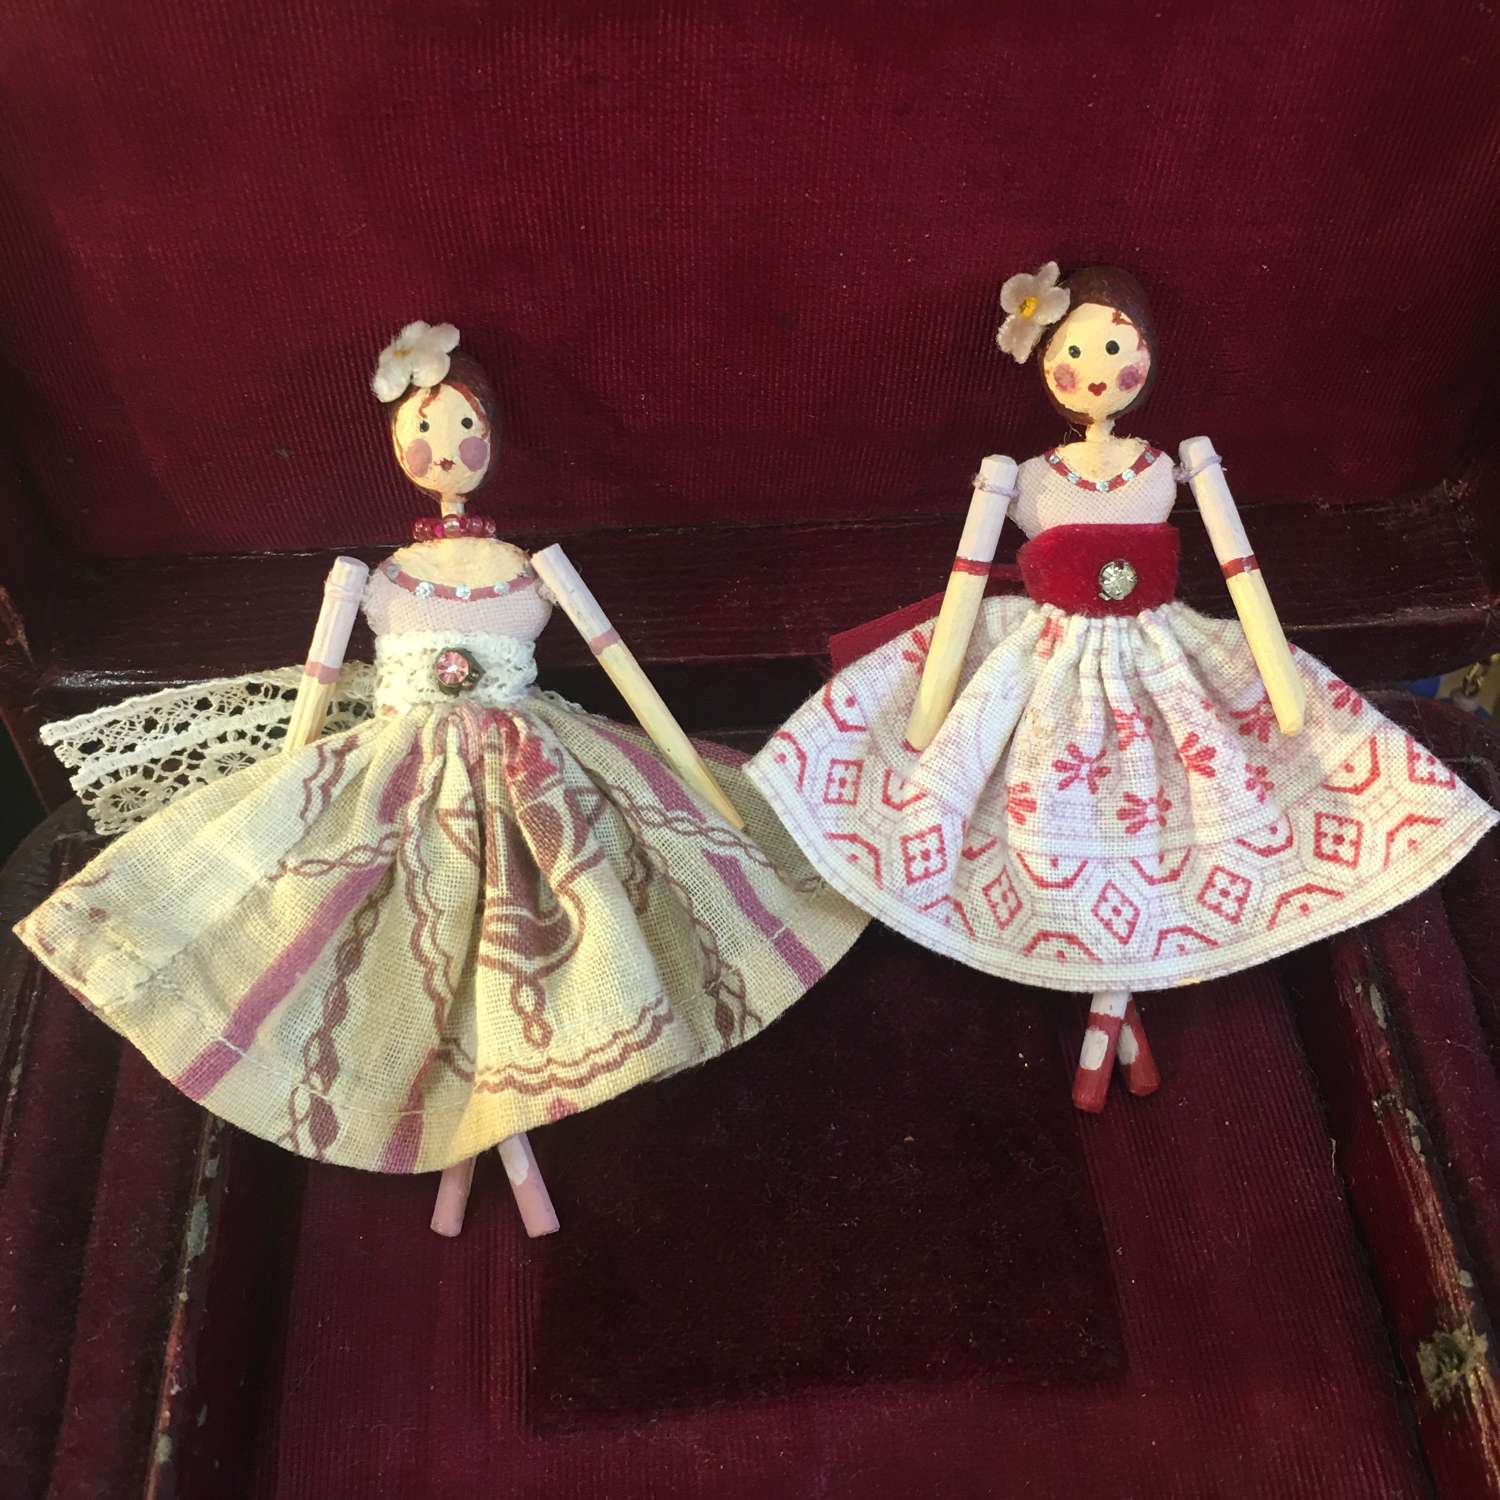 Tiny paper clay dolls with clothing made from vintage fabric and trims